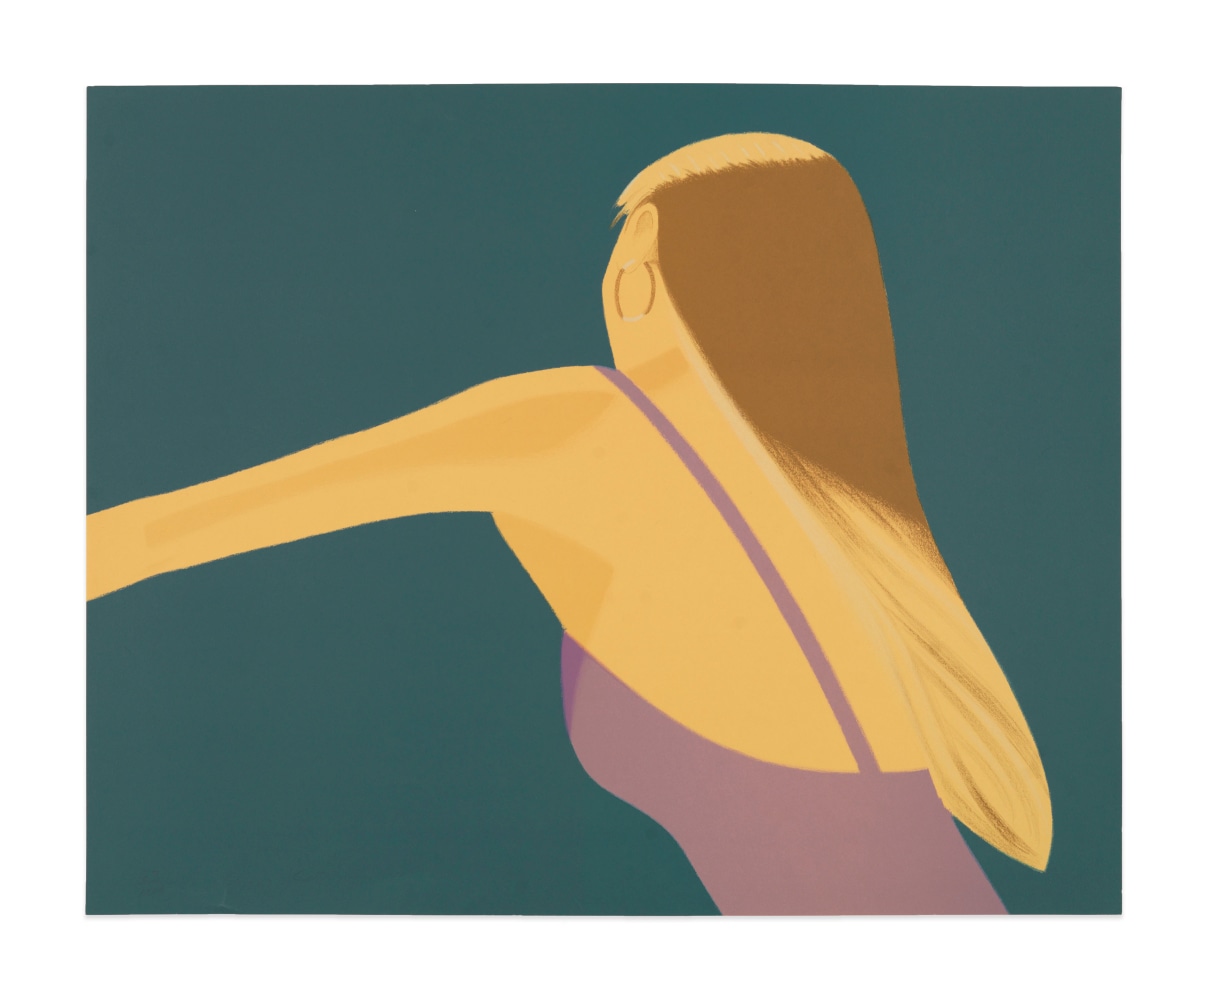 Color lithograph by Alex Katz featuring the back of a woman dancing with one arm stretched out wearing a lavender top and gold hoop earrings against a blue background